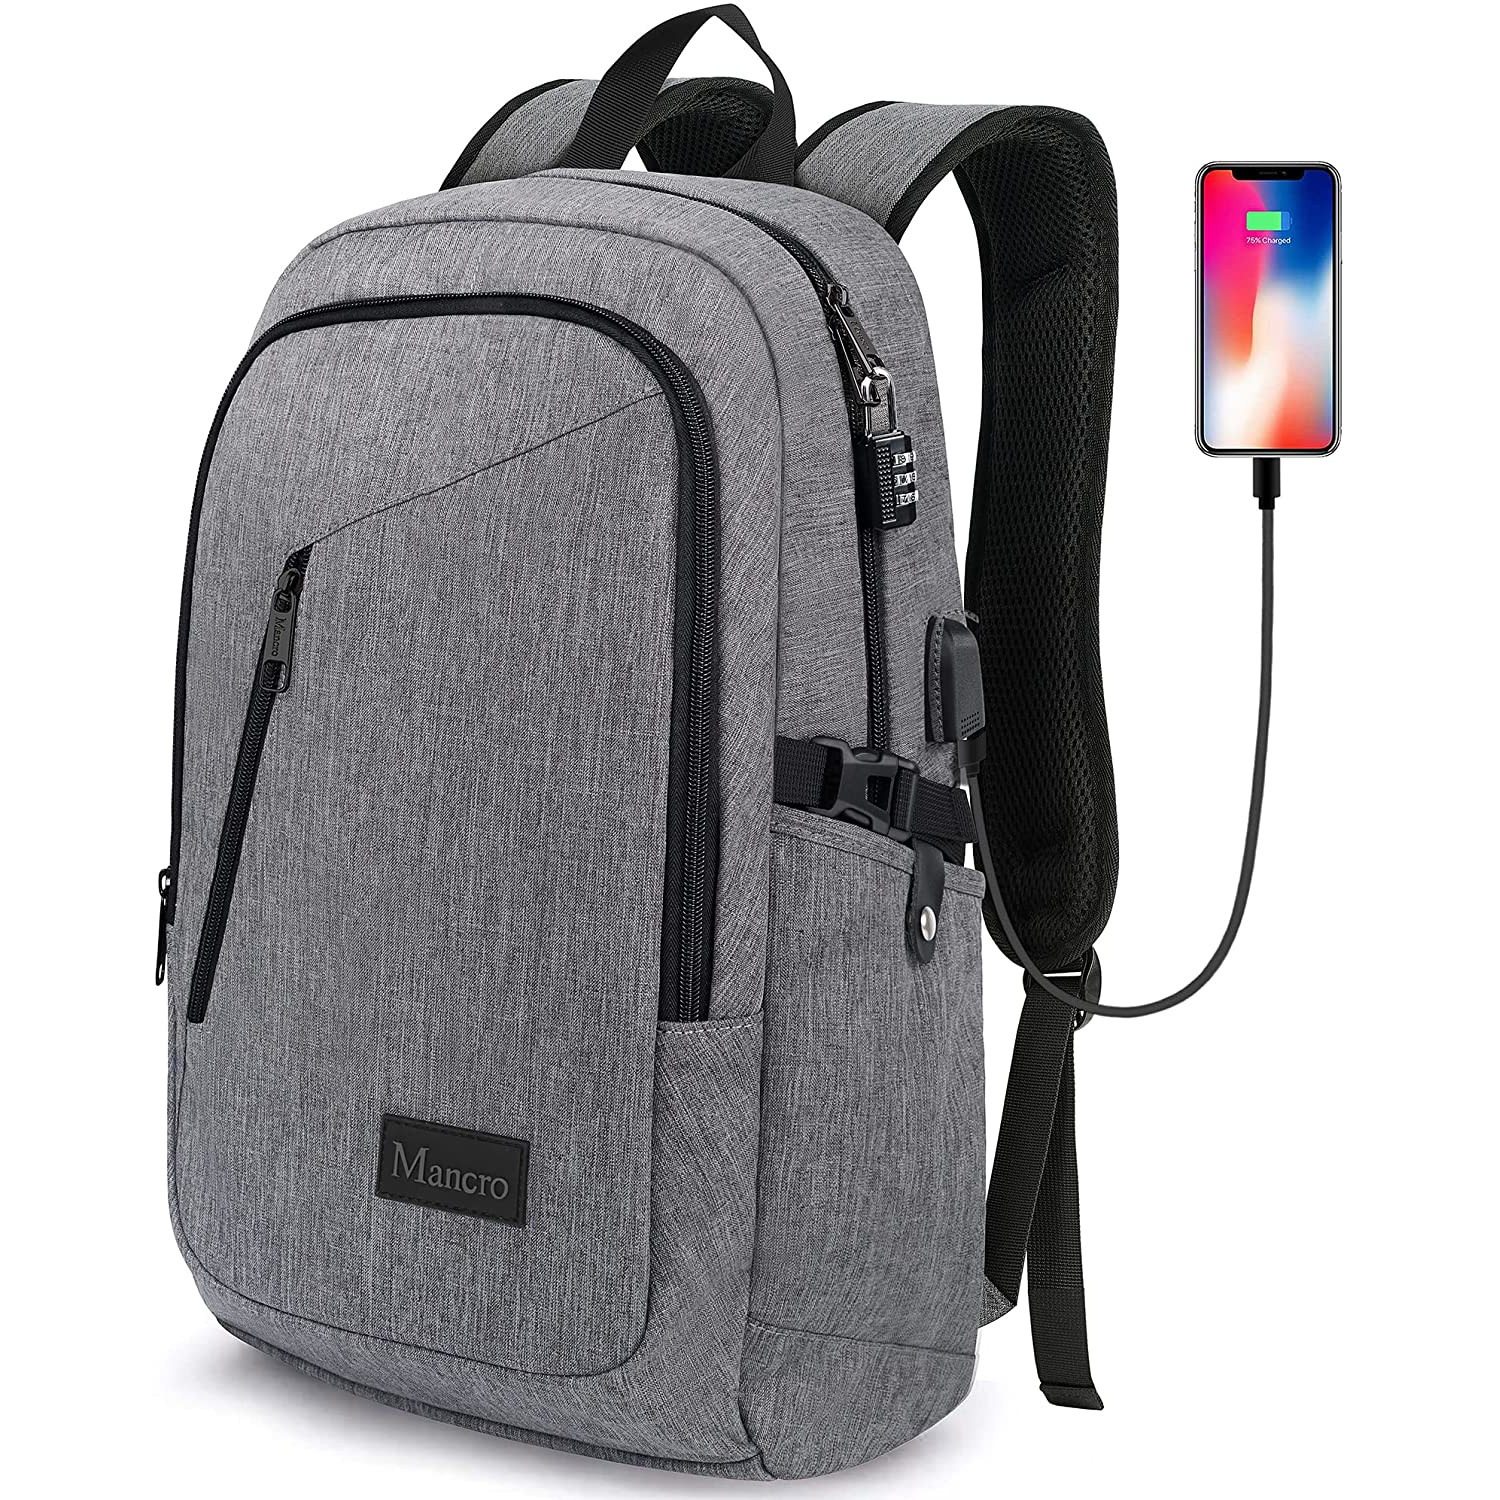 The Mancro Laptop Backpack